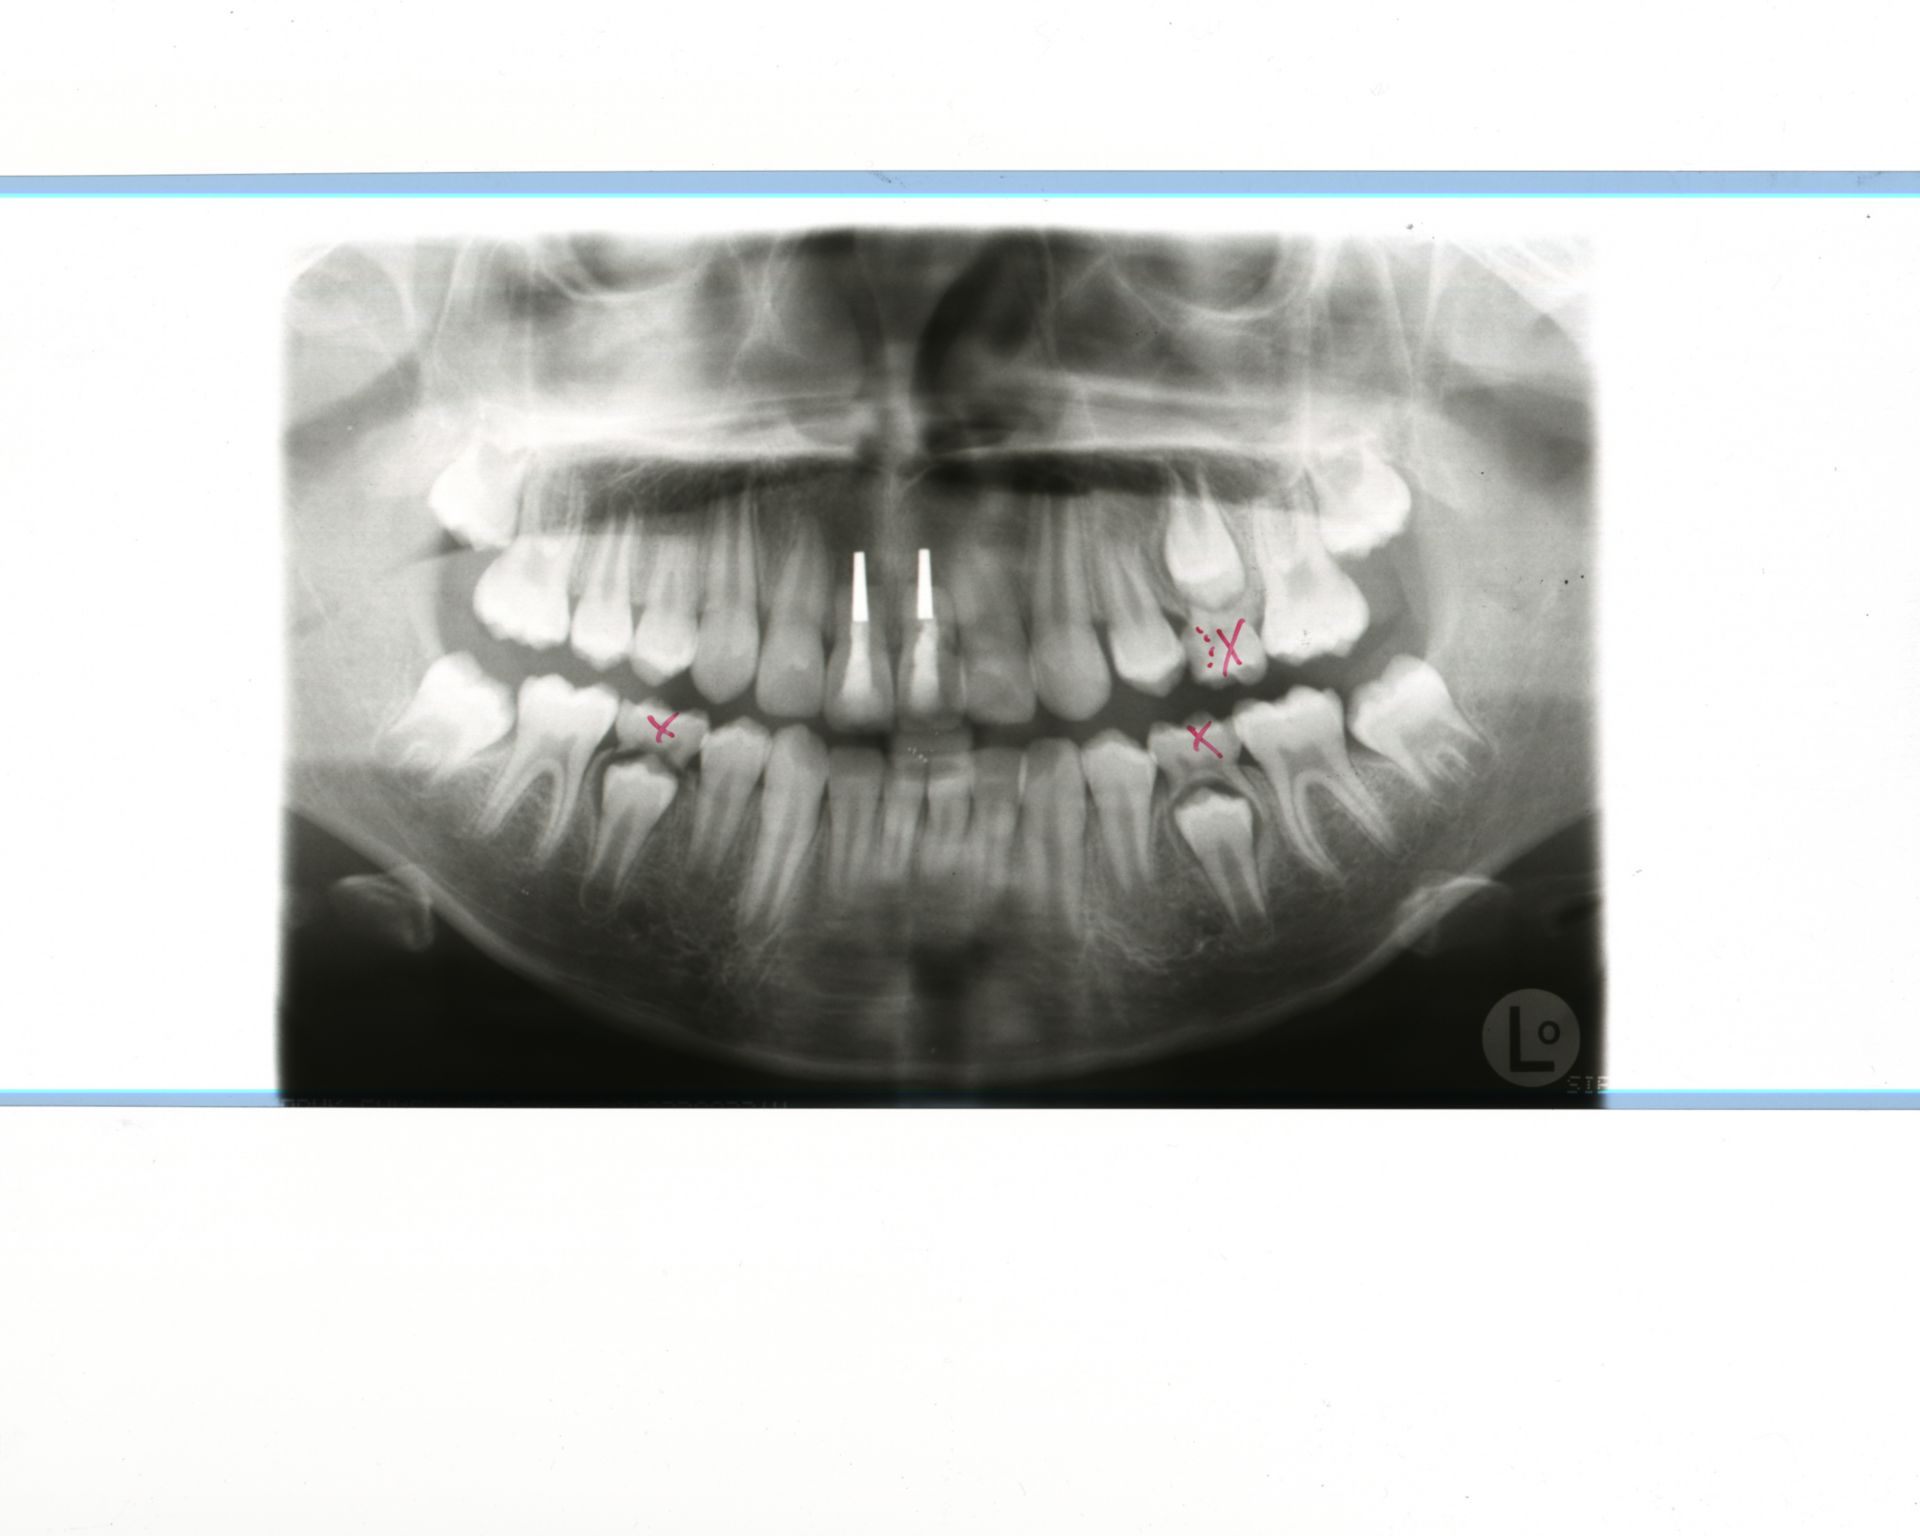 Control OPG. Around 16 months after a complex trauma to the frontal teeth